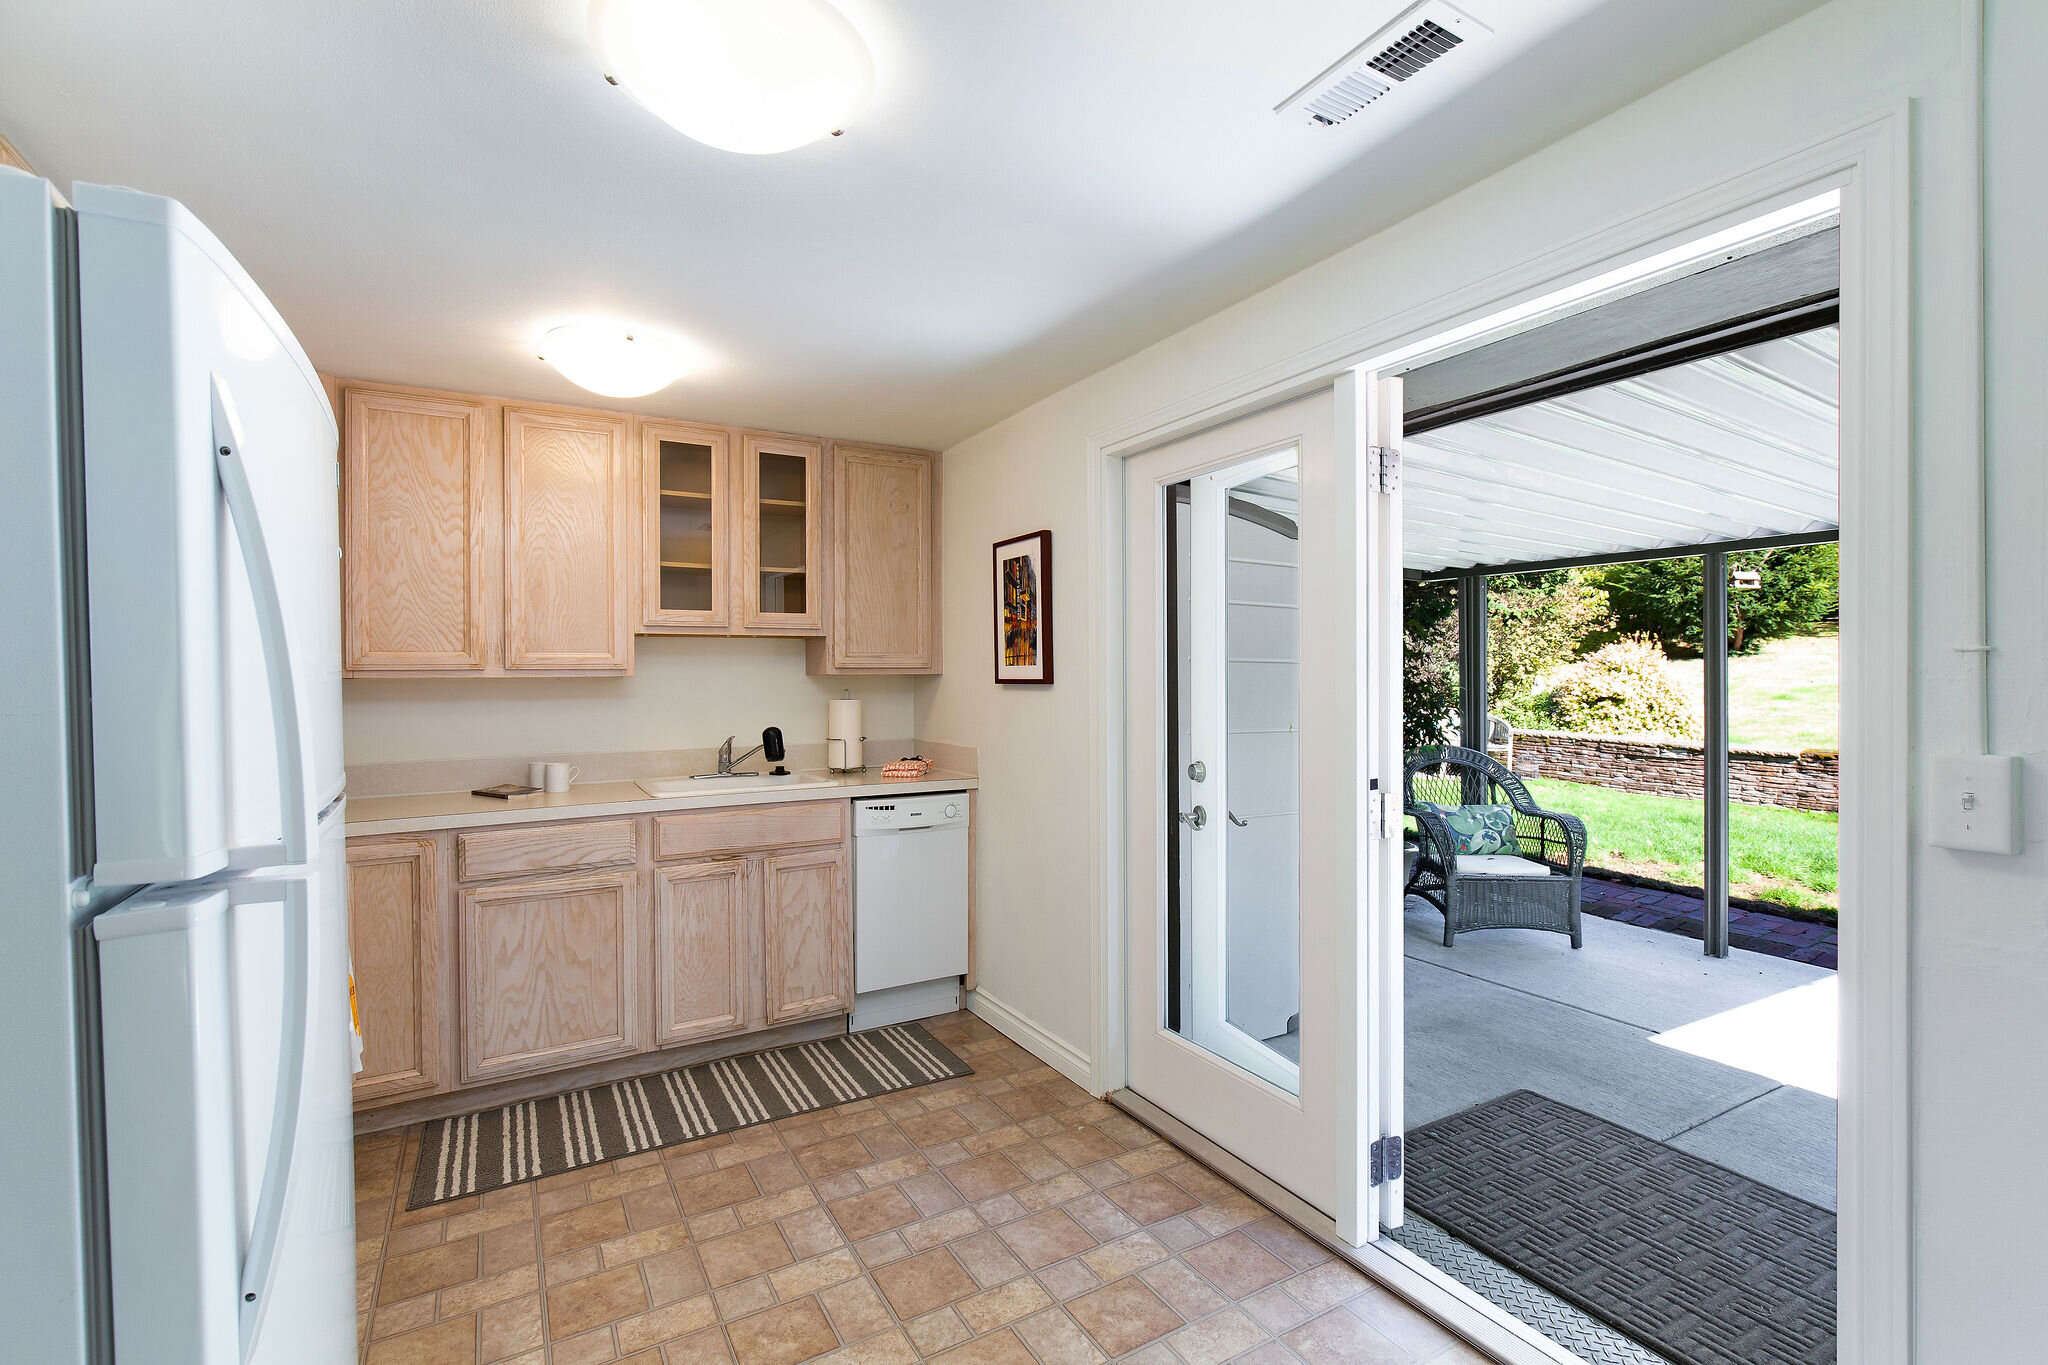  The kitchen has light and views from the yard with the french doors that open onto the covered patio. 